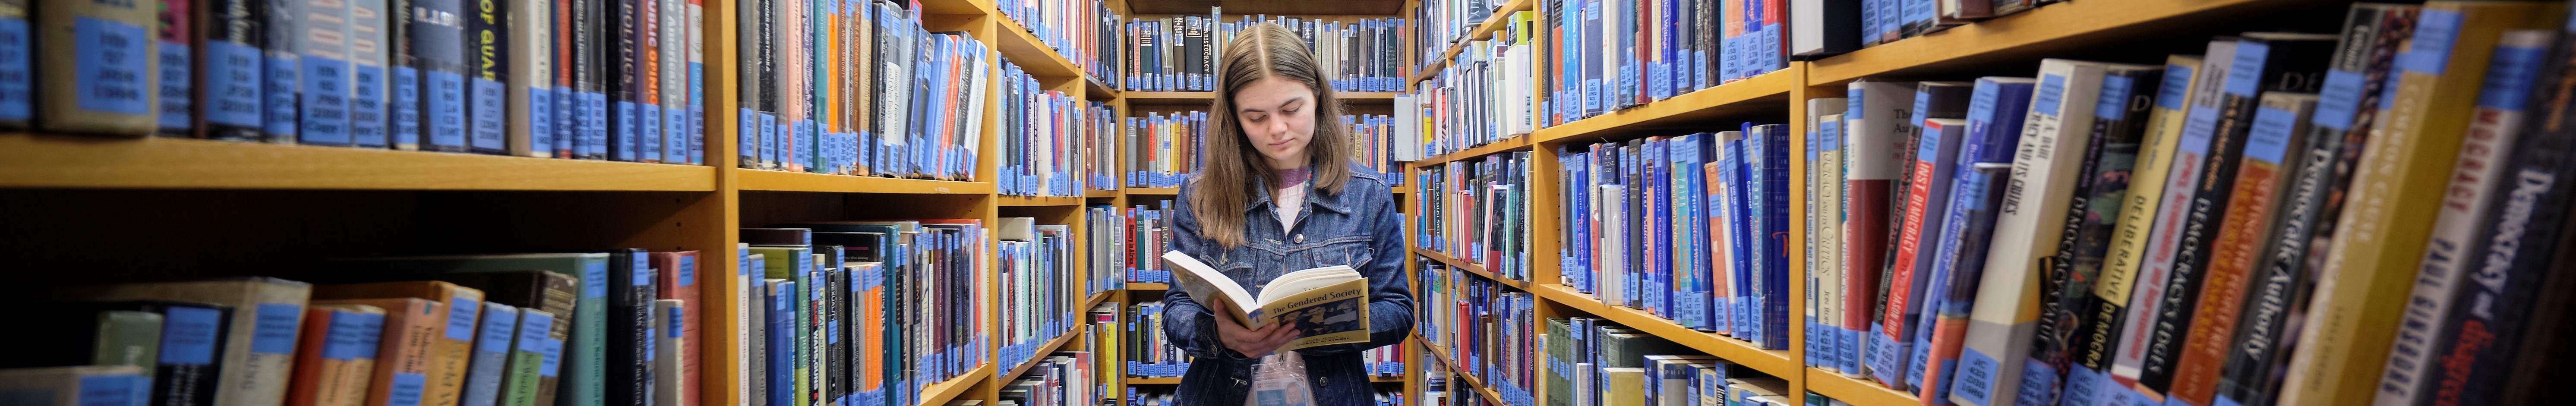 Female, standing with open book, reading between bookshelves.